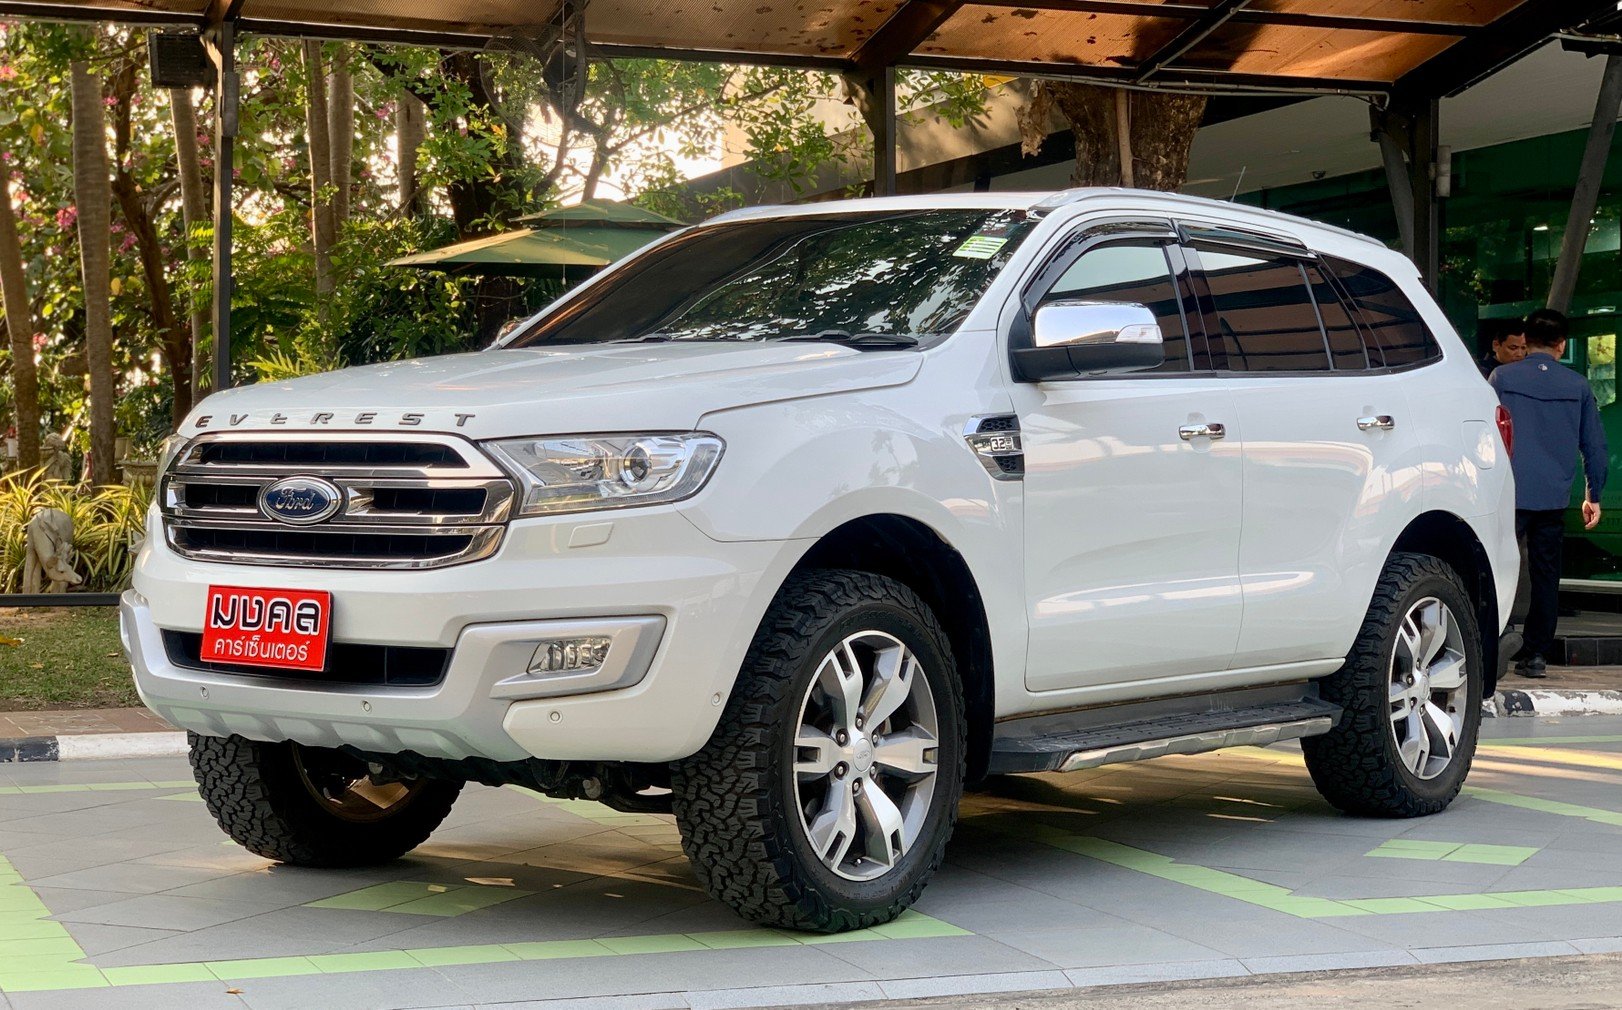 FORD EVEREST 3.2 TITANIUM  A/T 4WD 2016 สีเทา (LL0095)